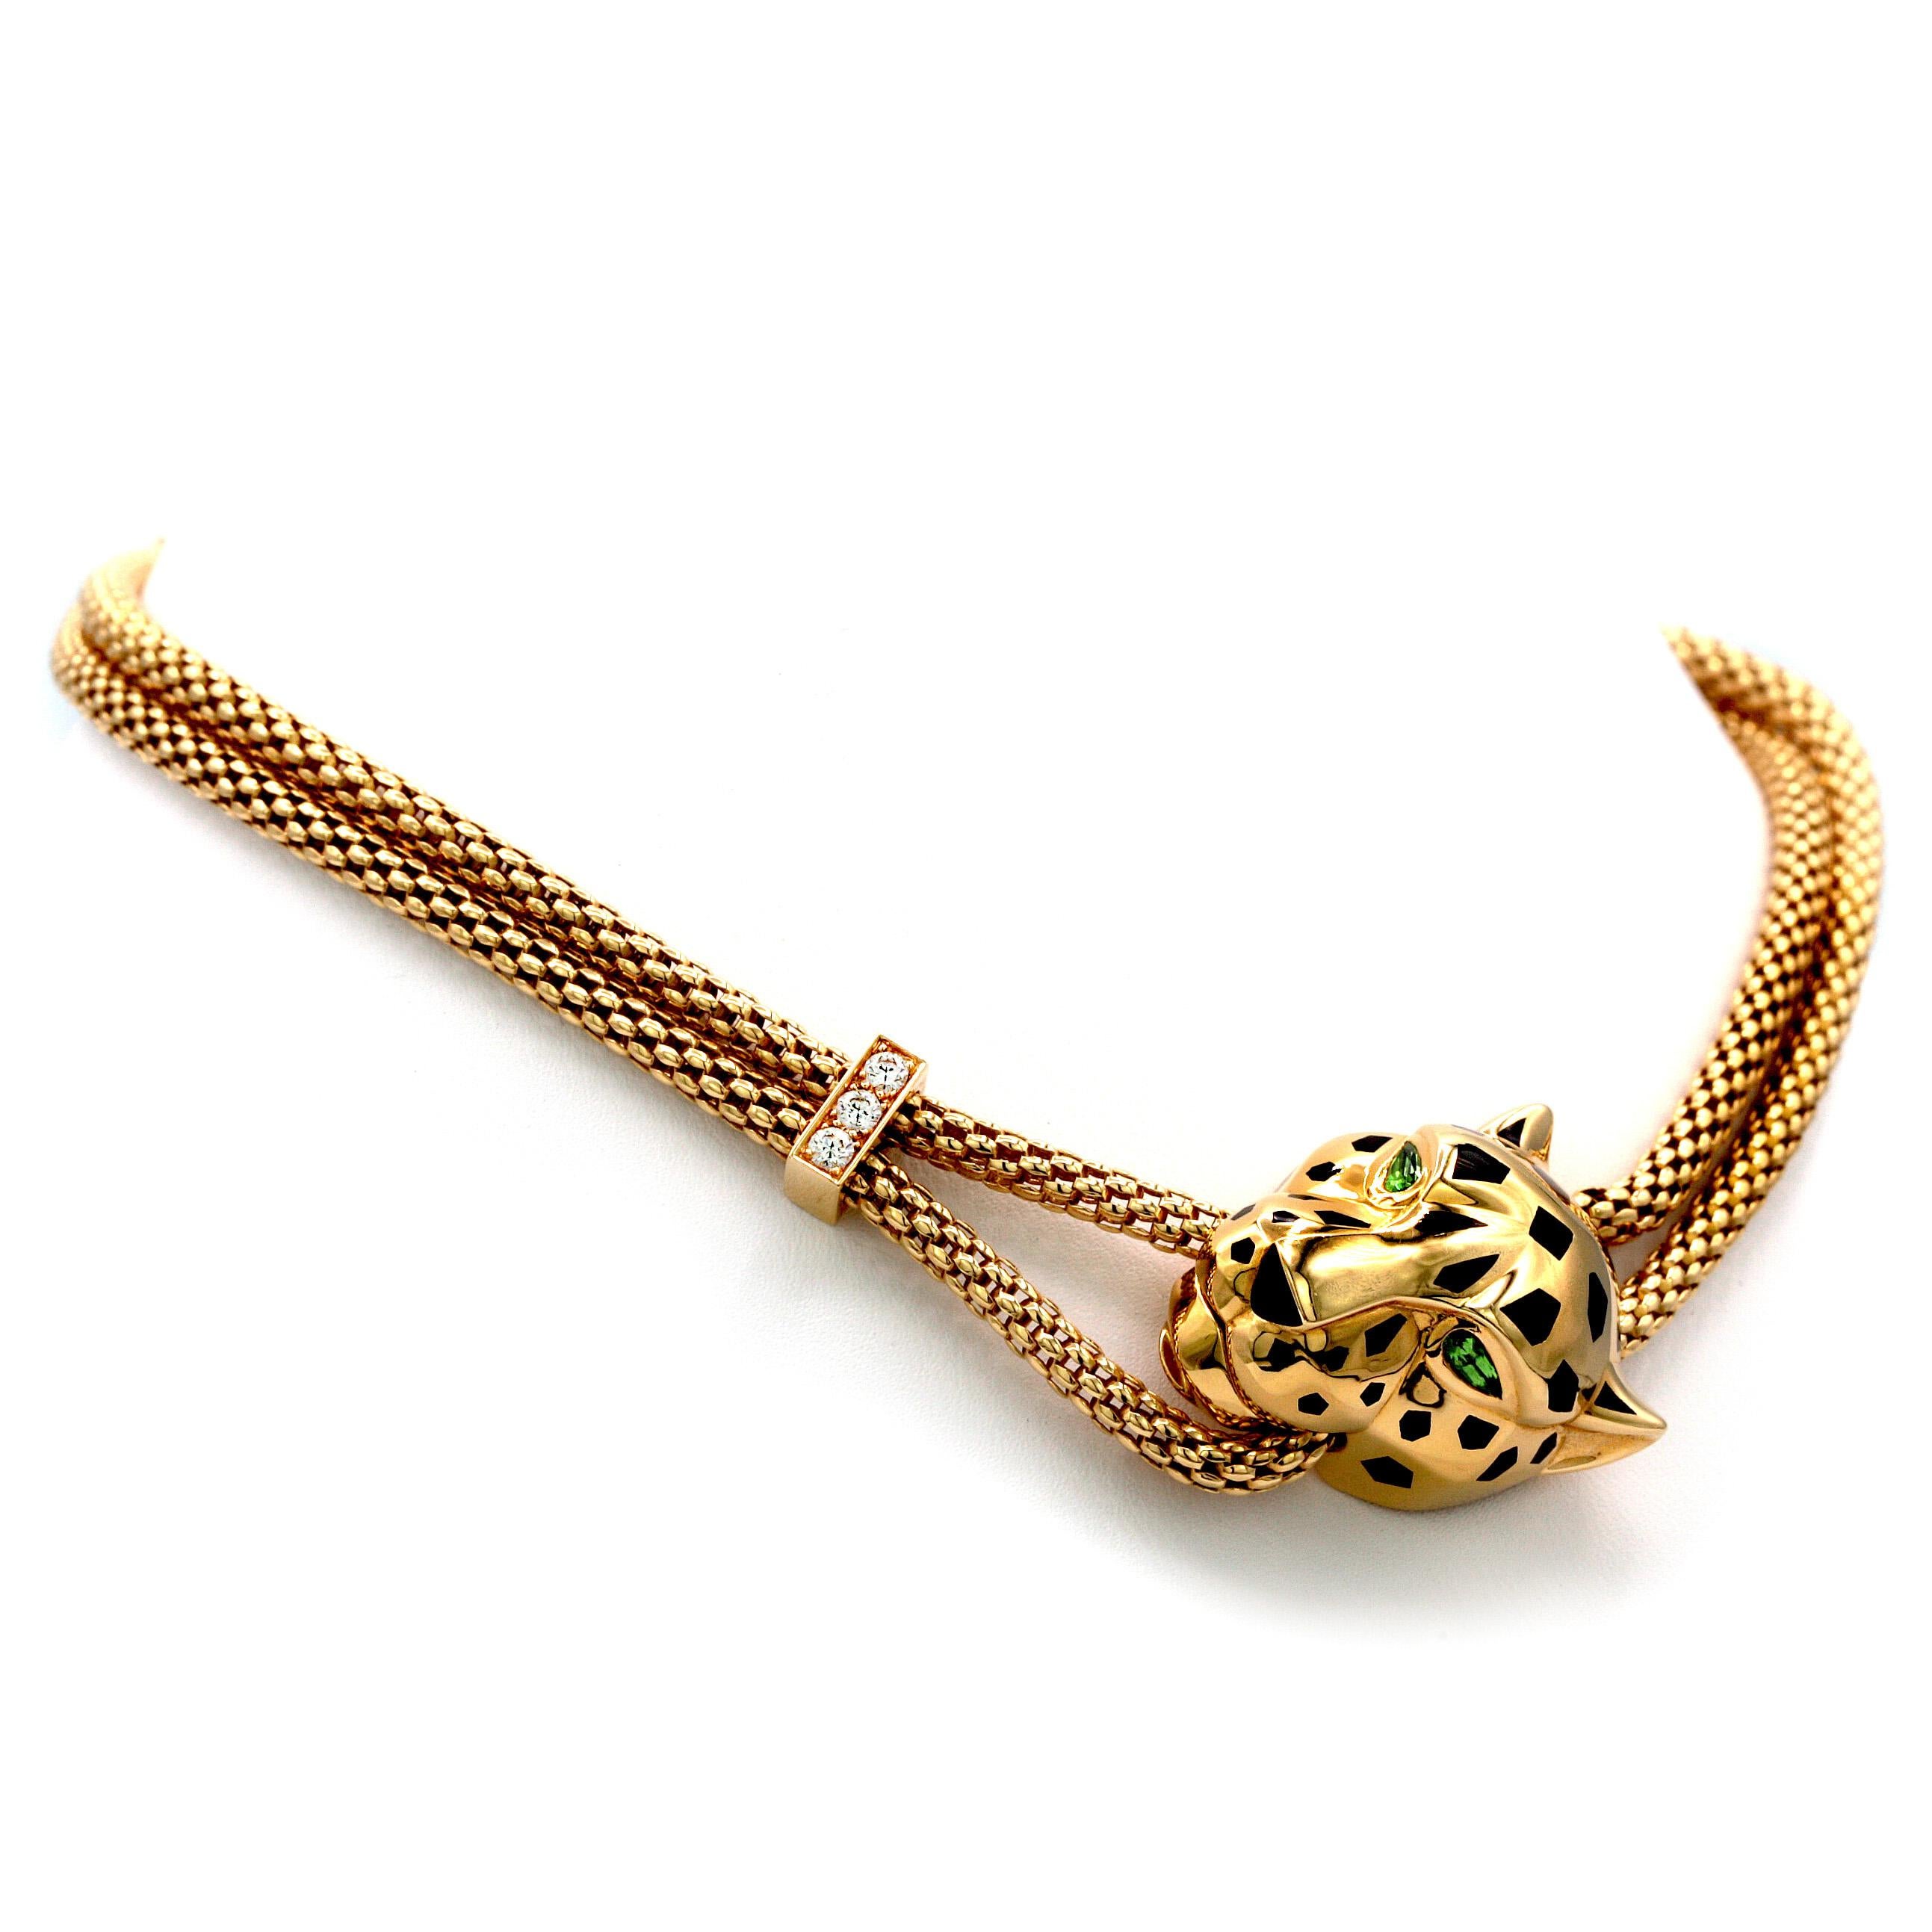 The panther, the symbolic animal of Cartier, made its first appearance in the Maison's collections in 1914.

This Necklace is made of 18K yellow gold, black lacquer, set with 3 brilliant-cut diamonds totaling 0.16 carat. Tsavorite garnet,